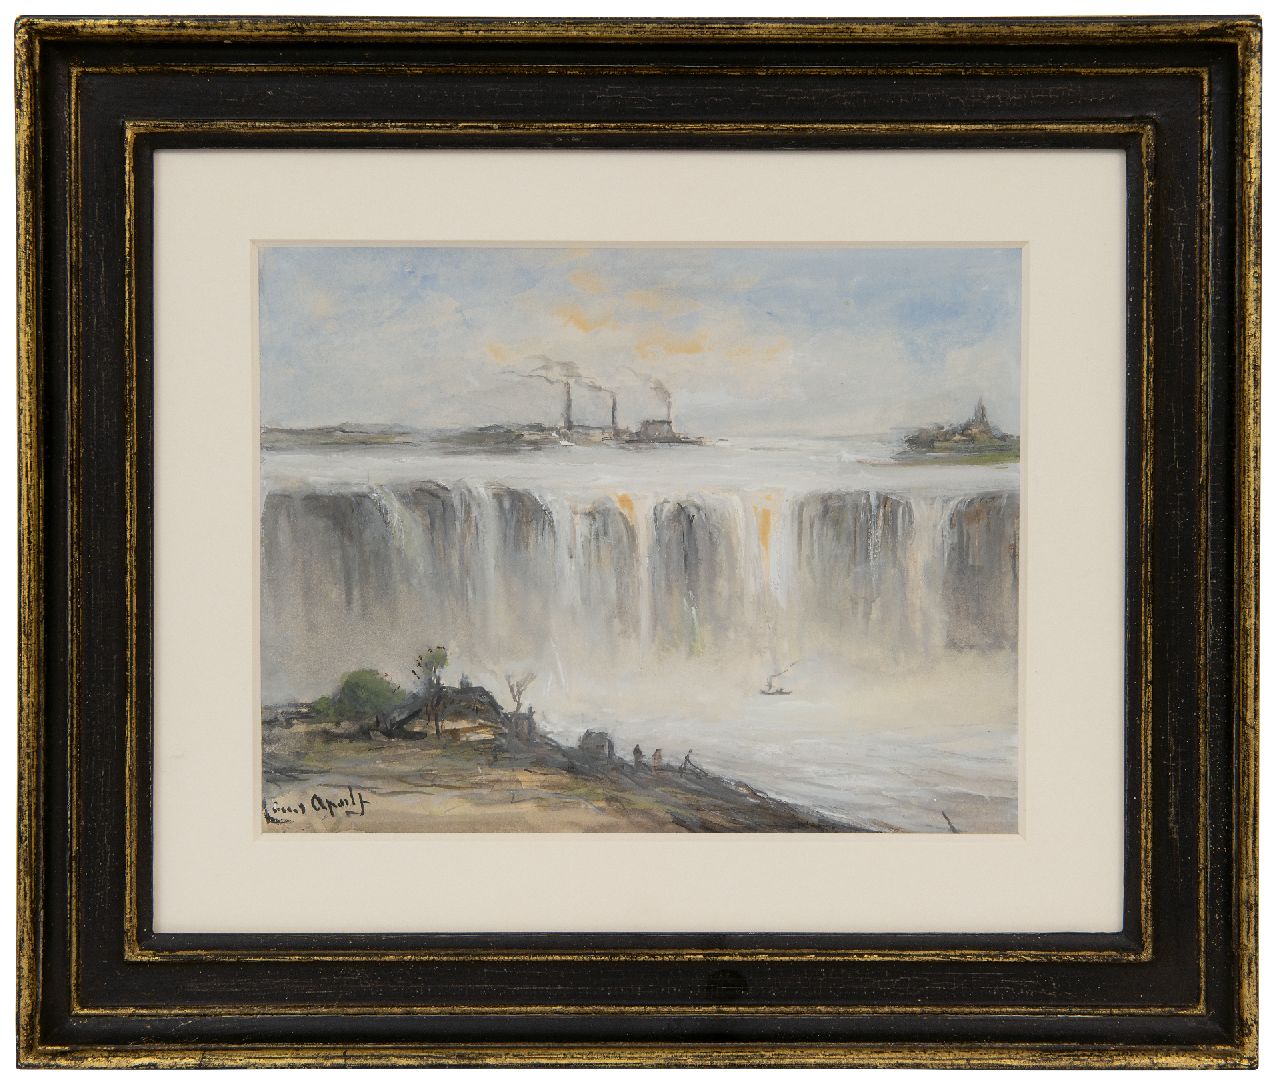 Apol L.F.H.  | Lodewijk Franciscus Hendrik 'Louis' Apol | Watercolours and drawings offered for sale | The Niagara falls, watercolour and gouache on paper 15.0 x 19.8 cm, signed l.l. and dated 1895 on the reverse